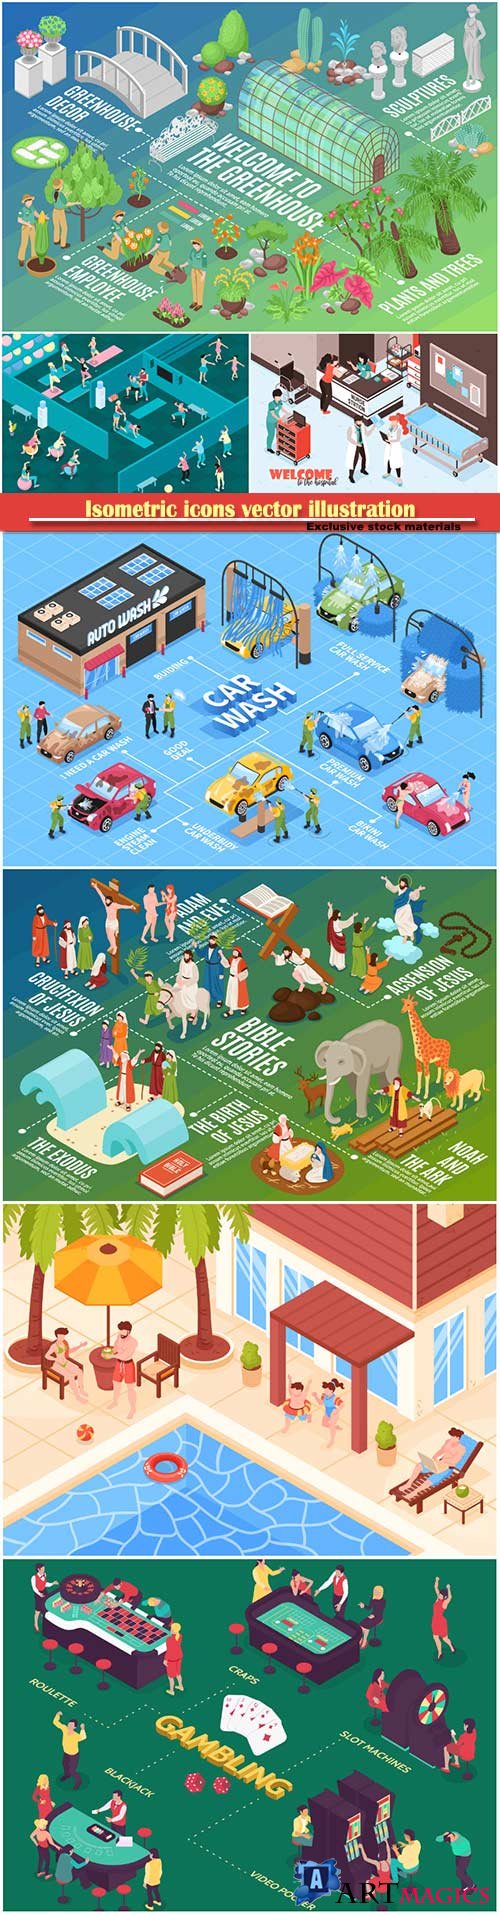 Isometric icons vector illustration, banner design template # 37